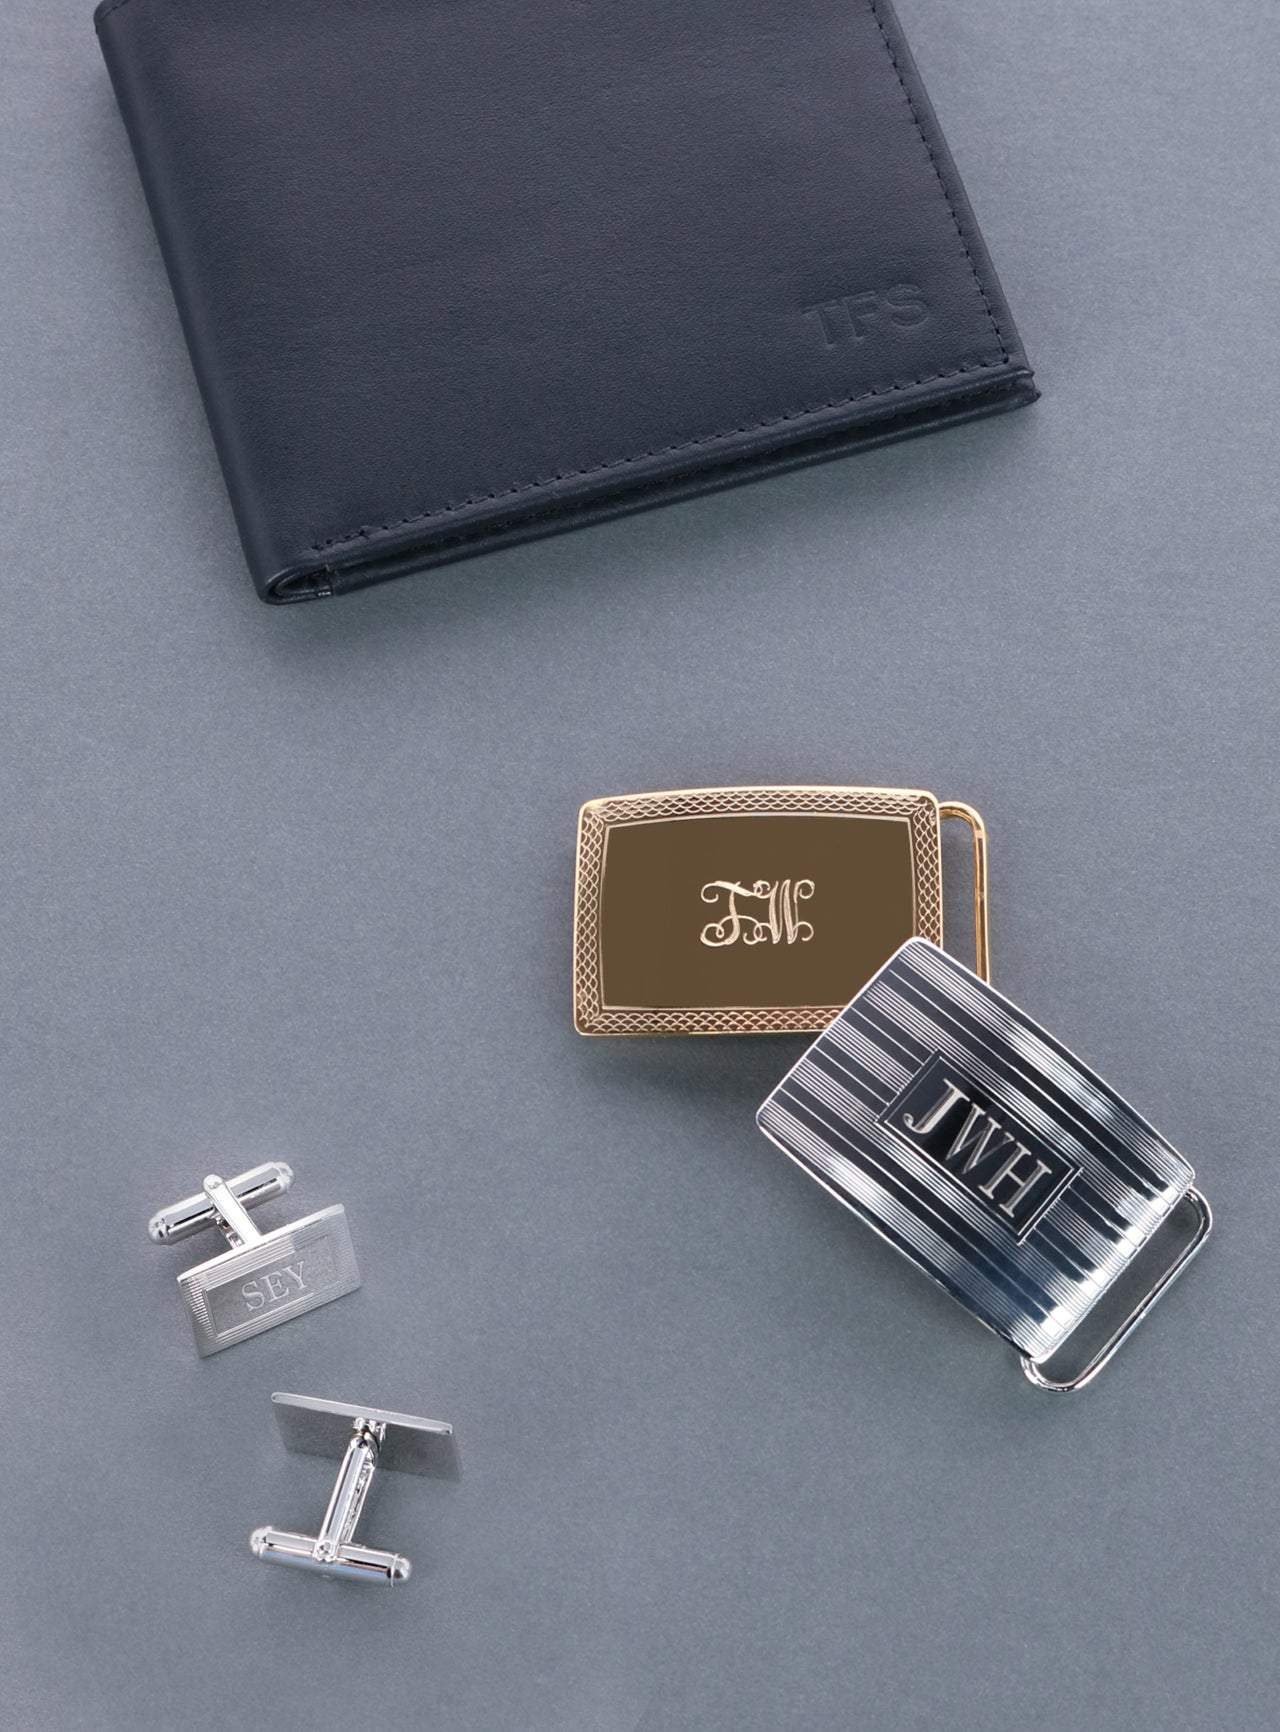 A wallet, cufflinks, and two belt buckles with monograms